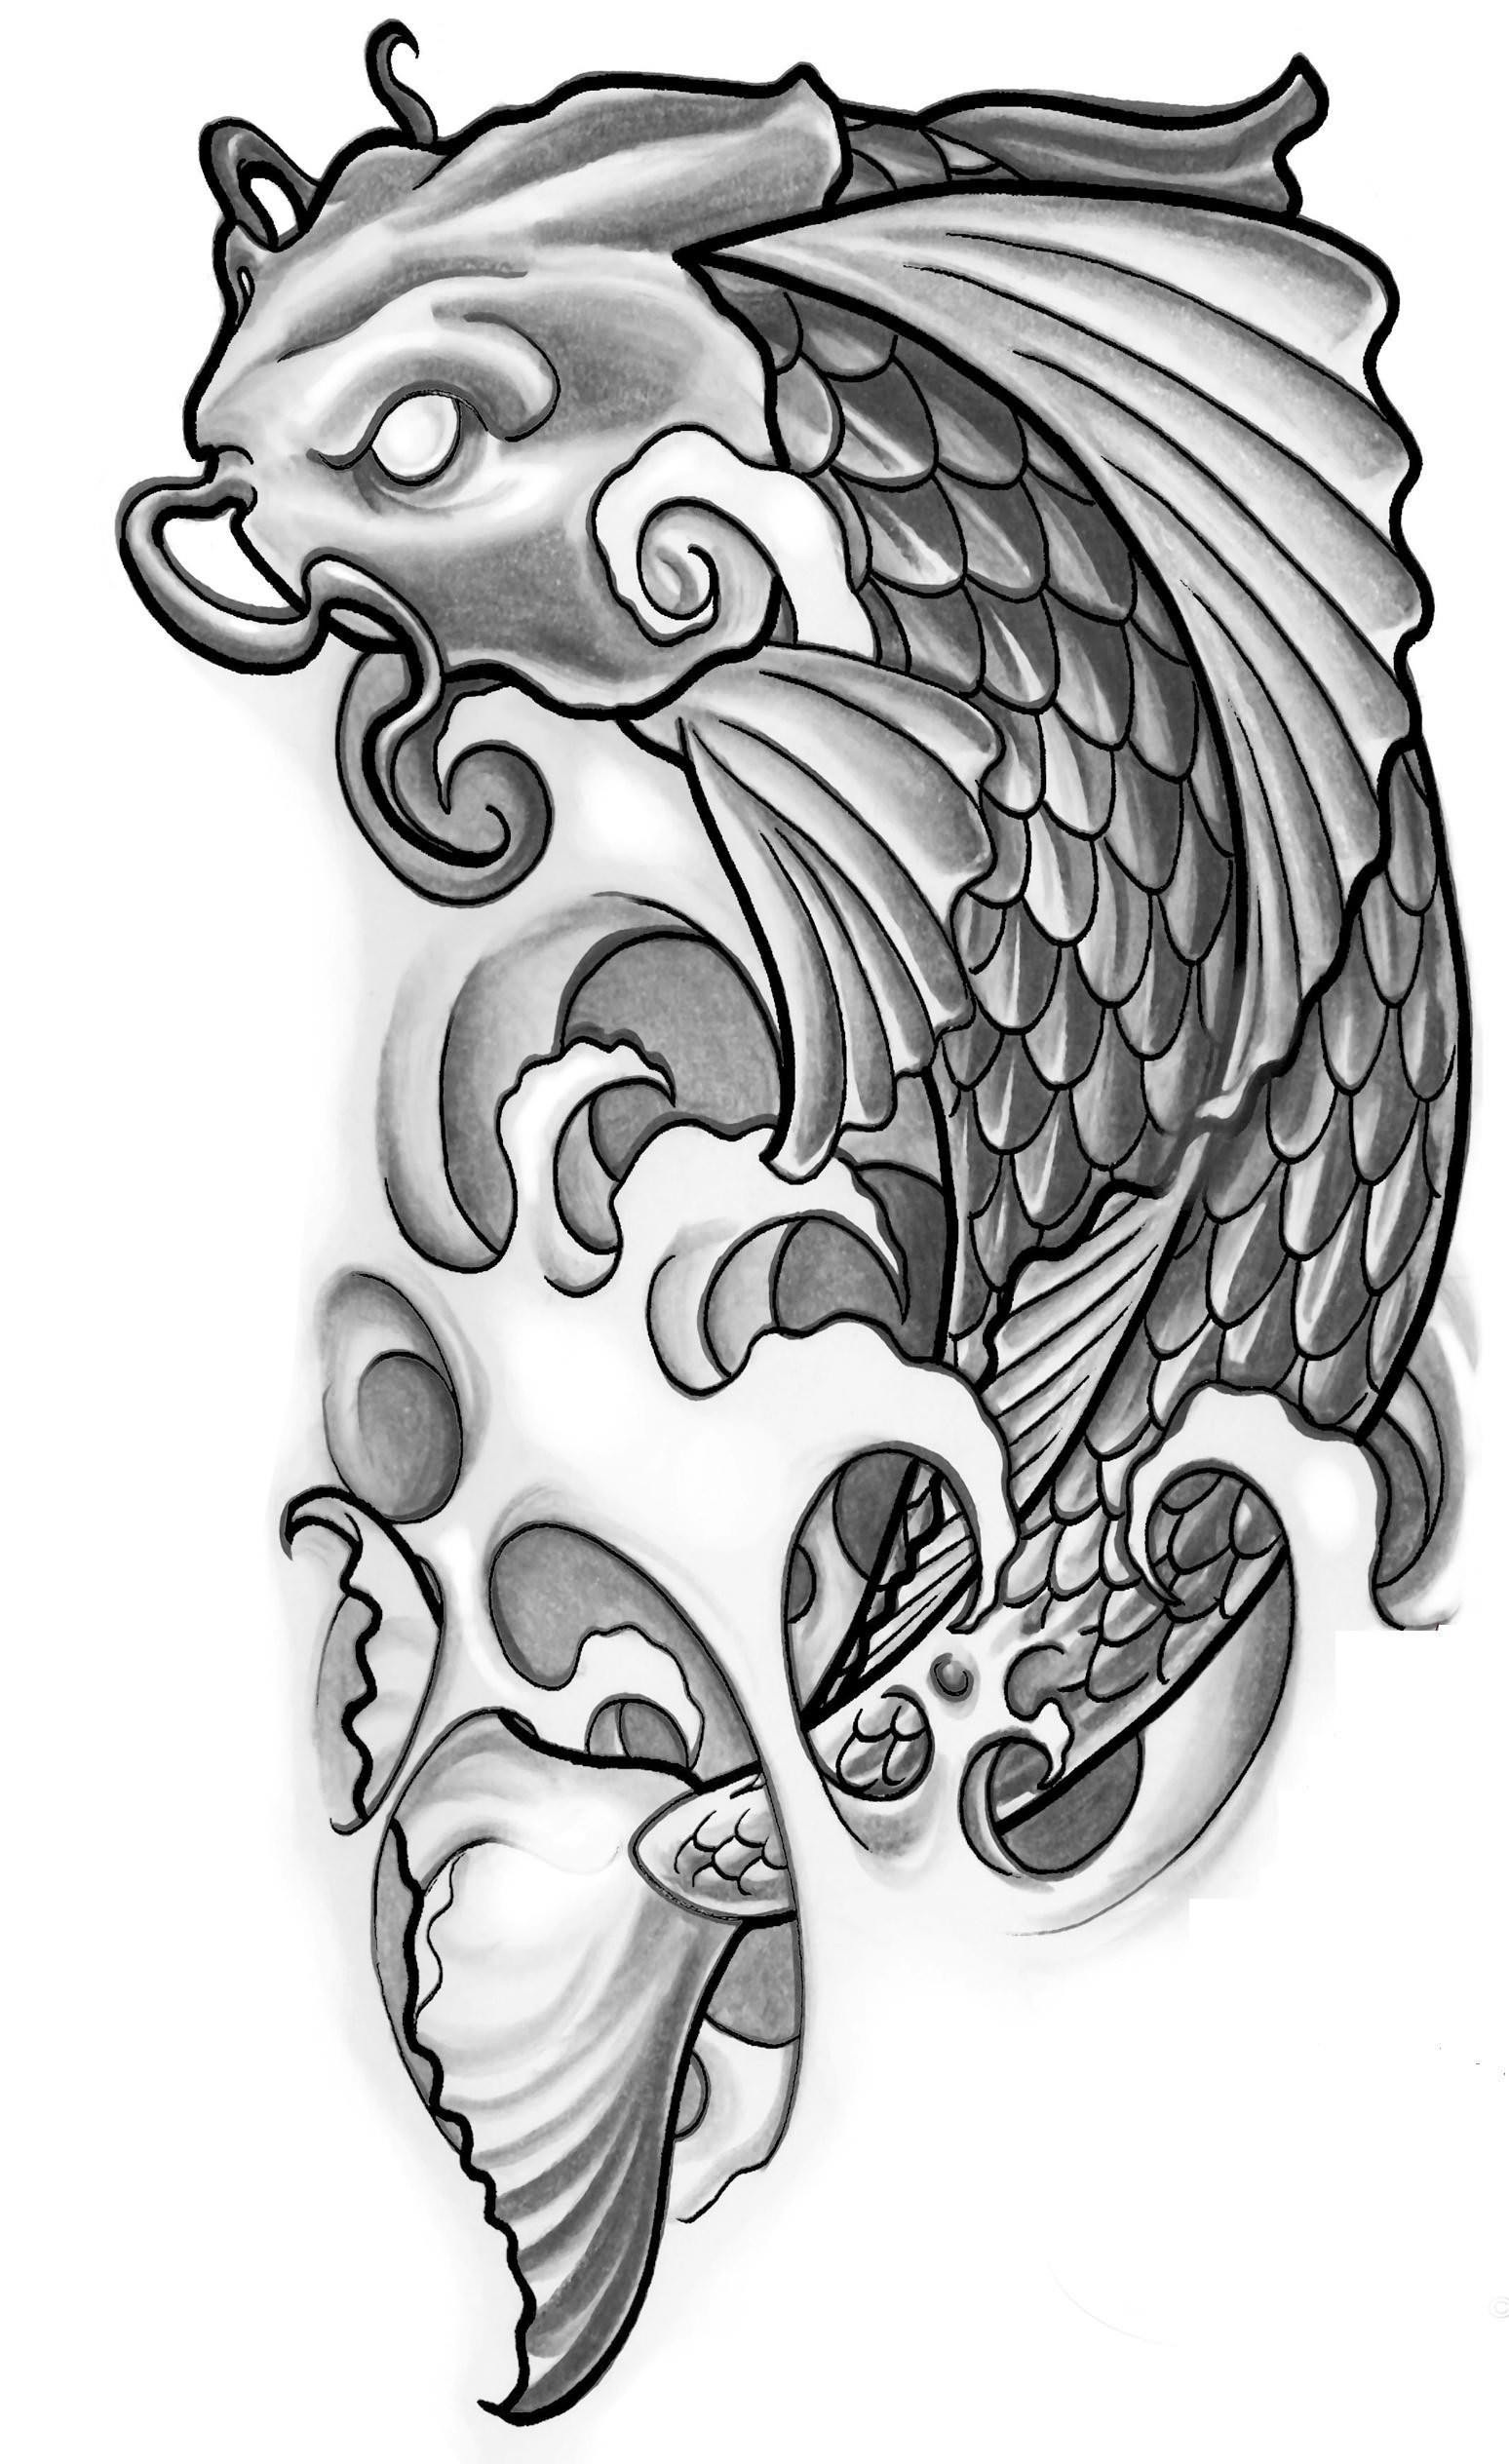 Koi Tattoos Designs, Ideas and Meaning | Tattoos For You